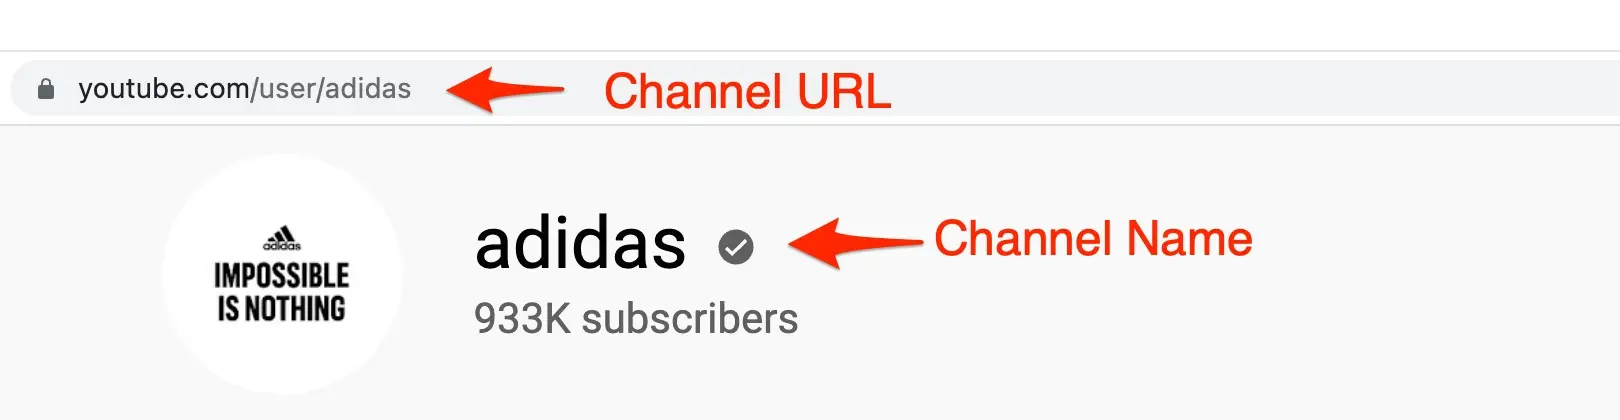 Channel Name VS Channel URL